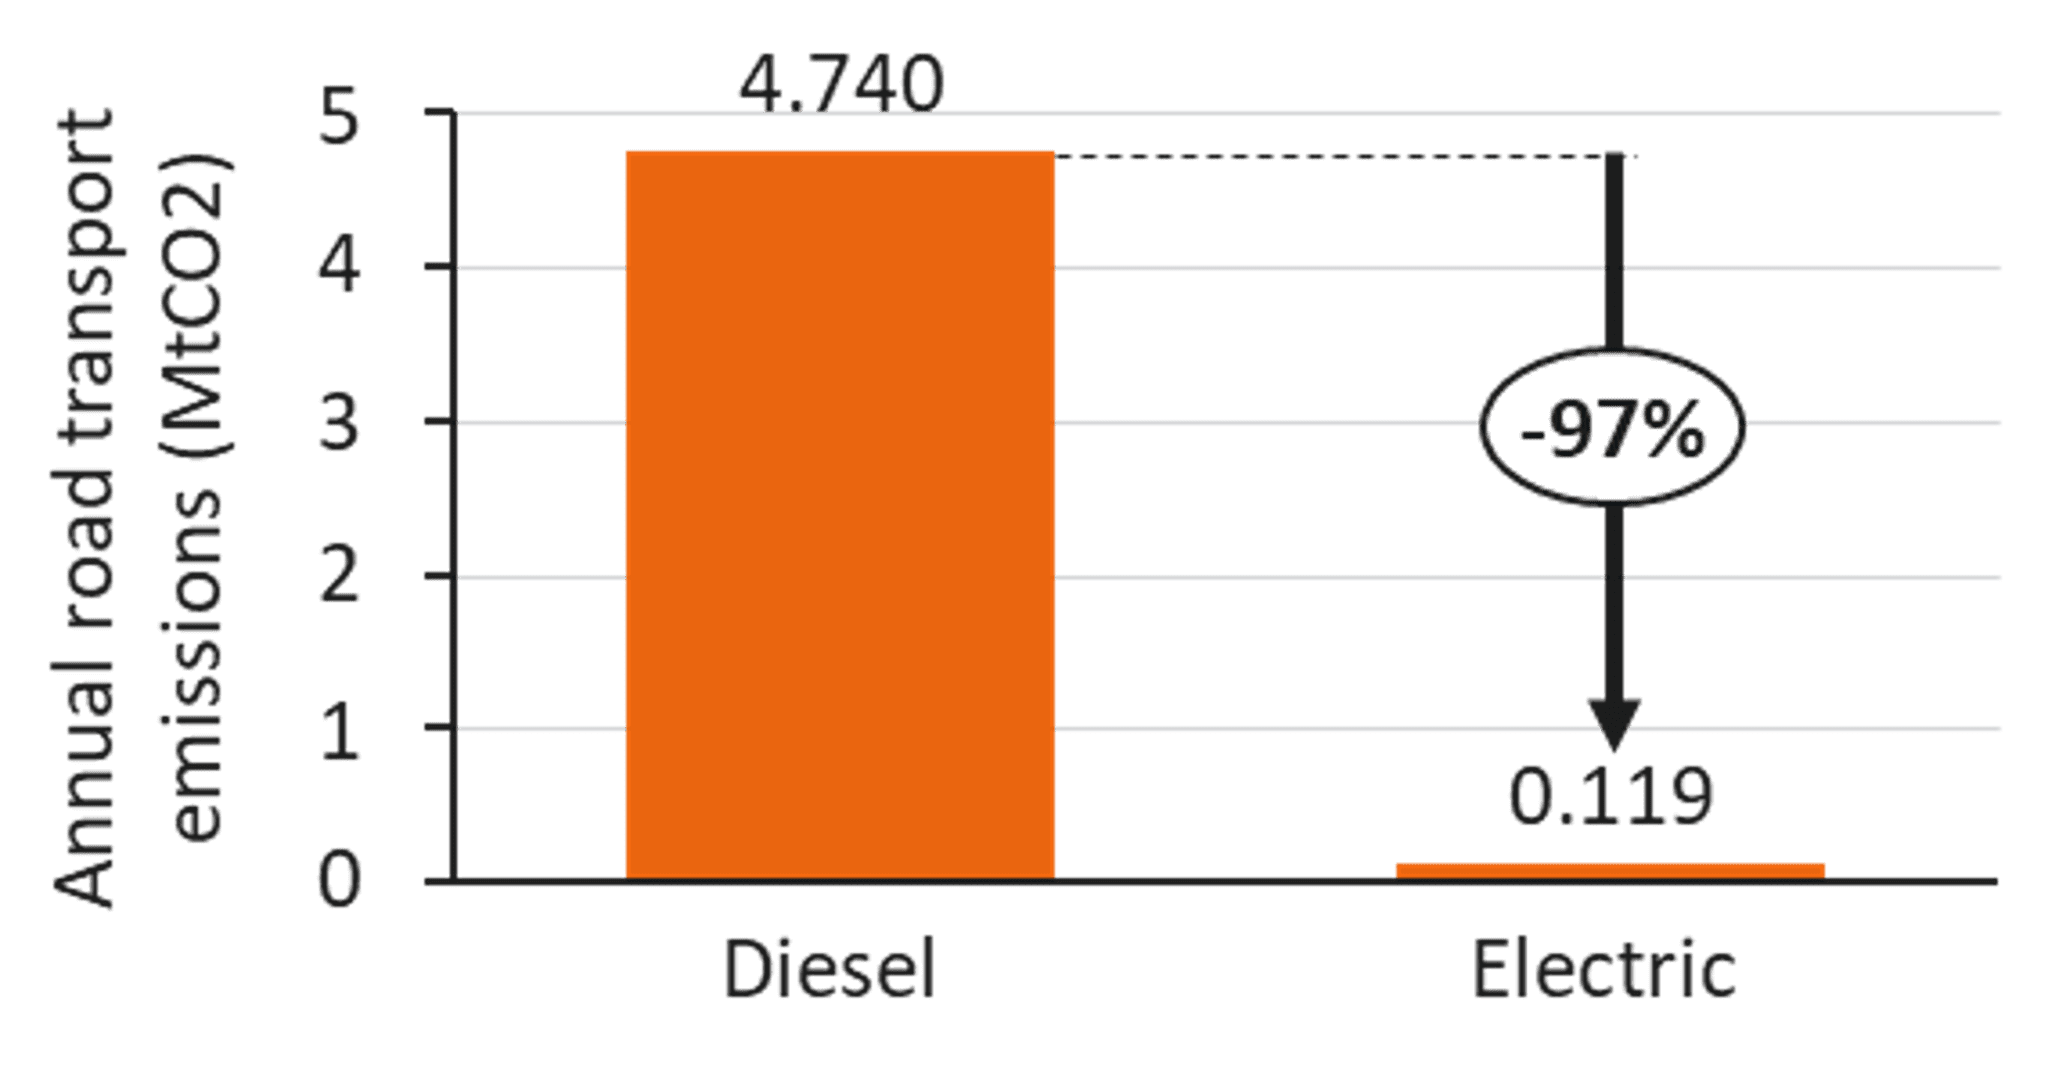 A bar chart (orange bars) shows the annual carbon emissions reduction for electrification of passenger cars. The annual carbon dioxide emissions for a fully diesel fleet is 4.740 mega-tonnes of carbon dioxide and the annual carbon dioxide emissions for a fully electrified fleet is 0.119 mega-tonnes of carbon dioxide. 